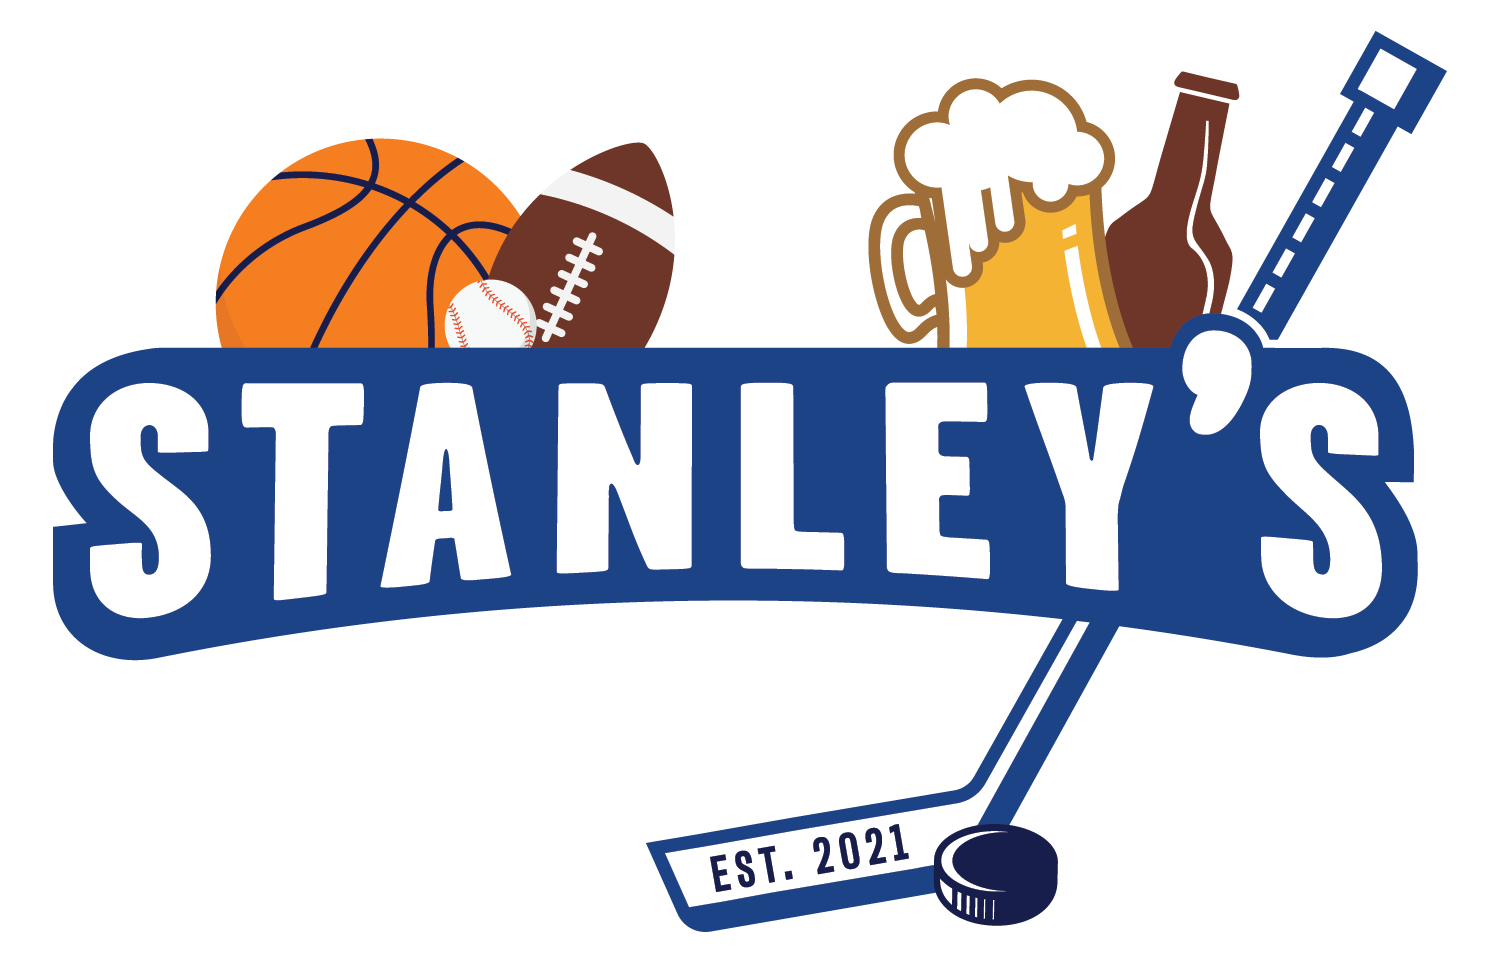 toilet Percentage Matron Stanley Cup & Grill